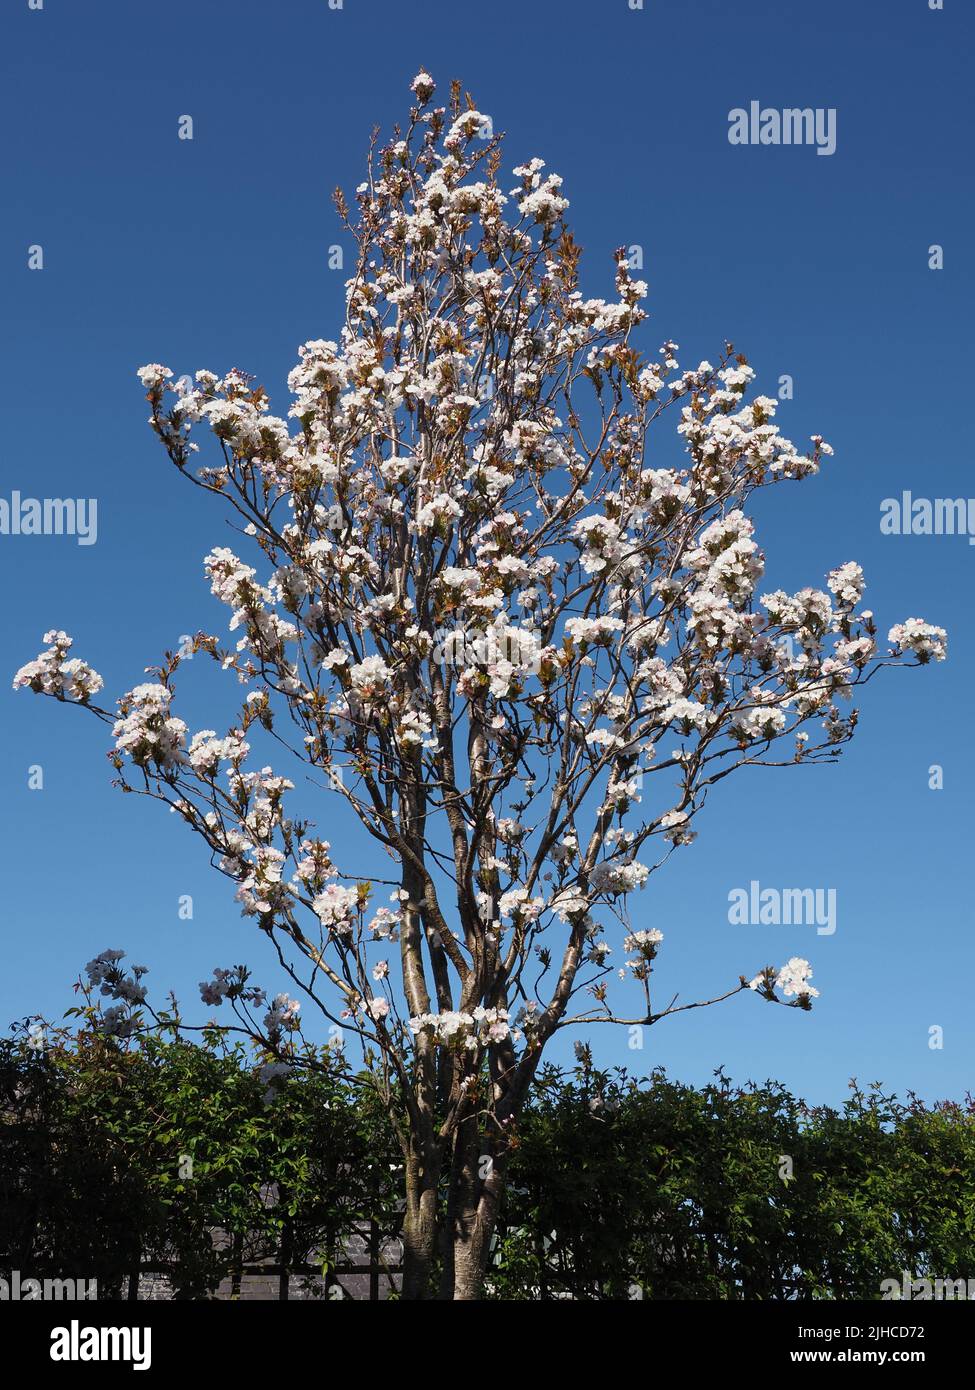 A 6 meter tall, mature Prunus Serrulata, Amanogawa, ornamental Japanese cherry tree. The pale pink & white blossom against a cloudless blue sky. Stock Photo